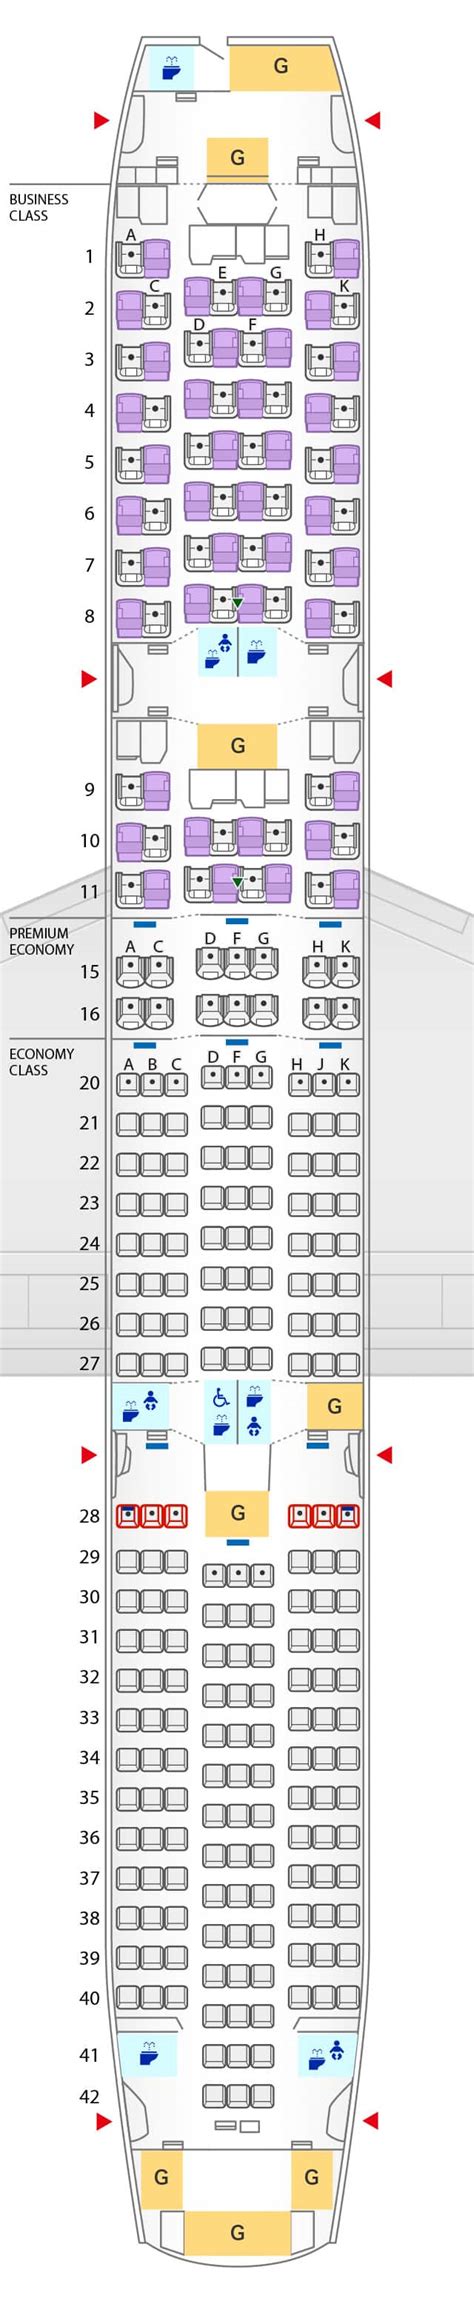 Boeing 787 9 dreamliner seat map. United - Boeing 787-9 3D aircraft seat map. Select Upper Deck or Lower Deck Lower deck Upper deck. Lights off on. BOEING 787-9. ... BOEING 787-9 United Premium Plus℠ 